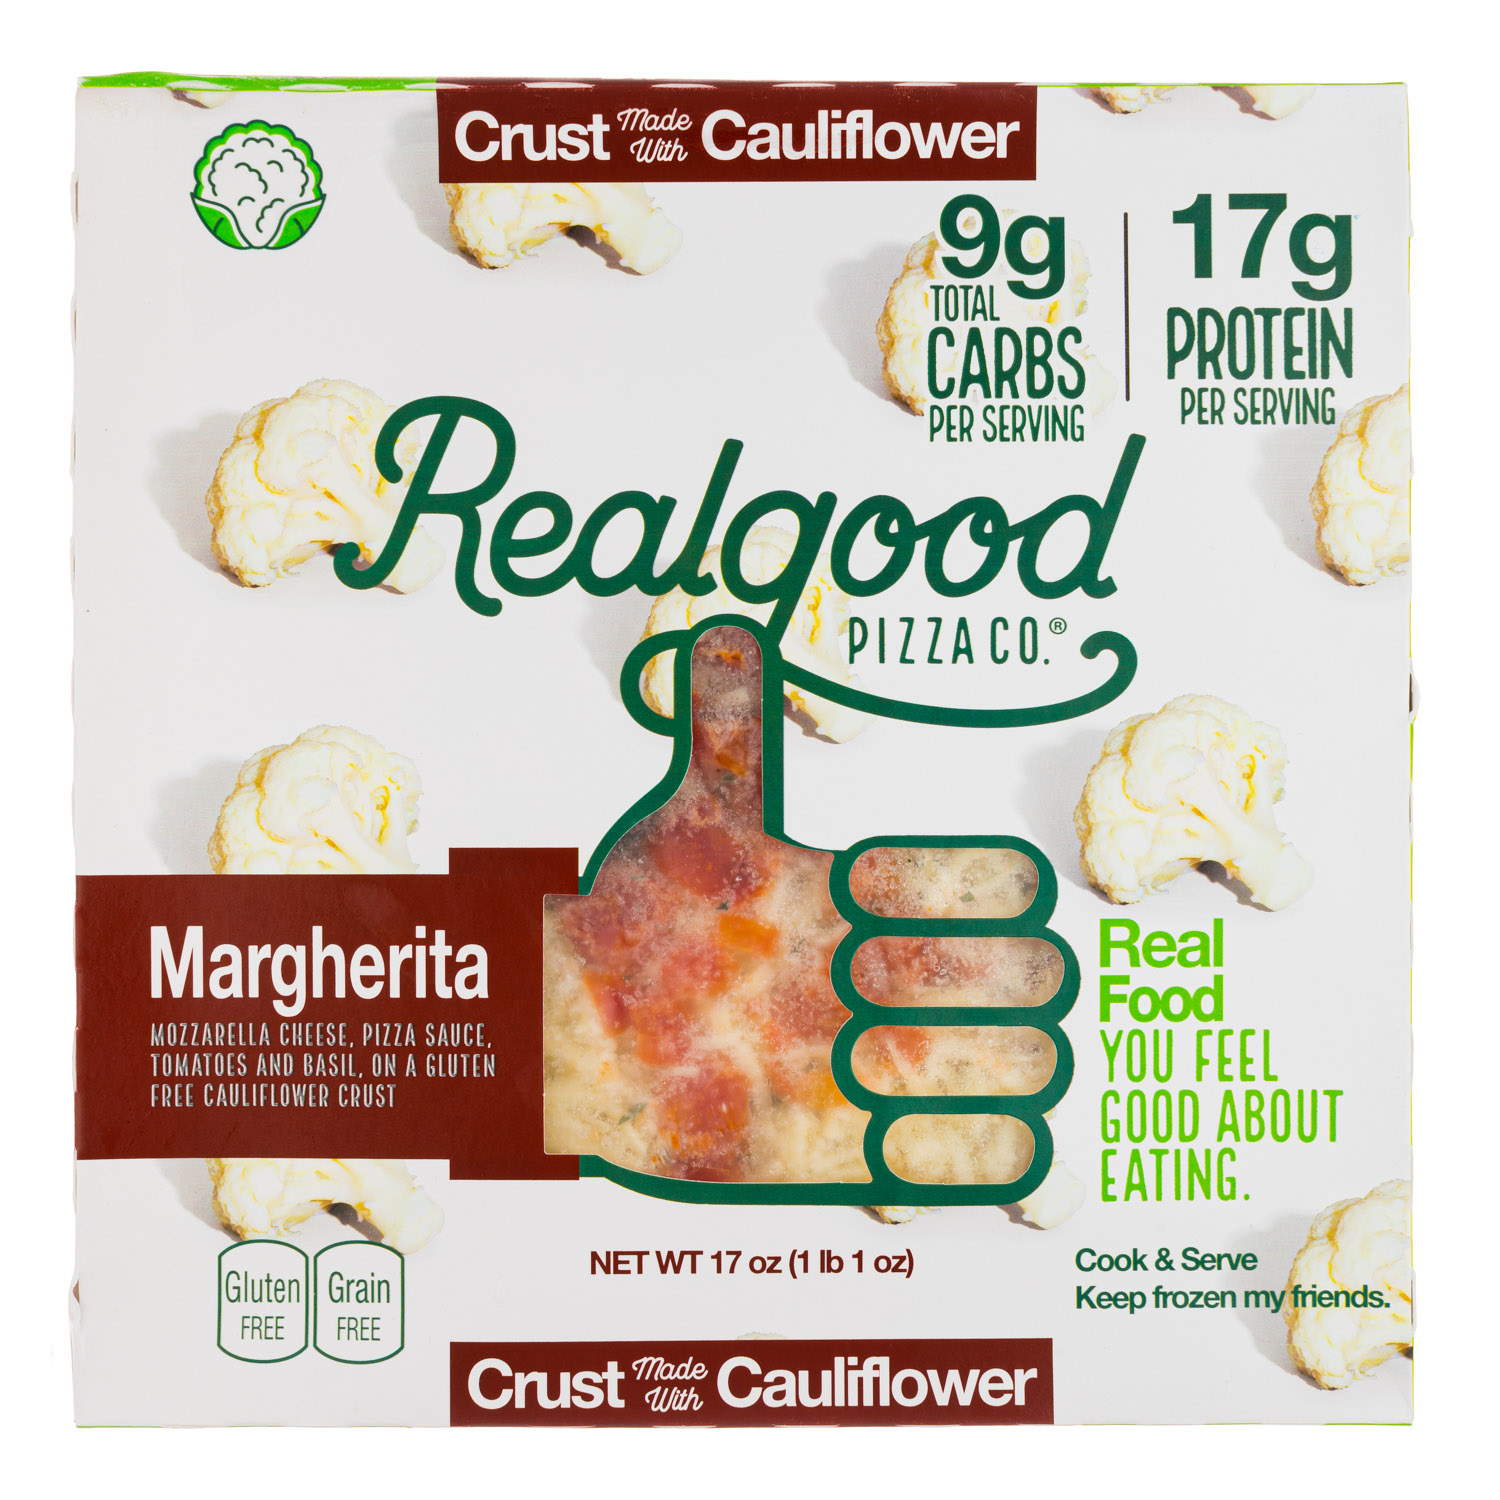 Real Good Foods launches high-protein, low-carb chicken nuggets